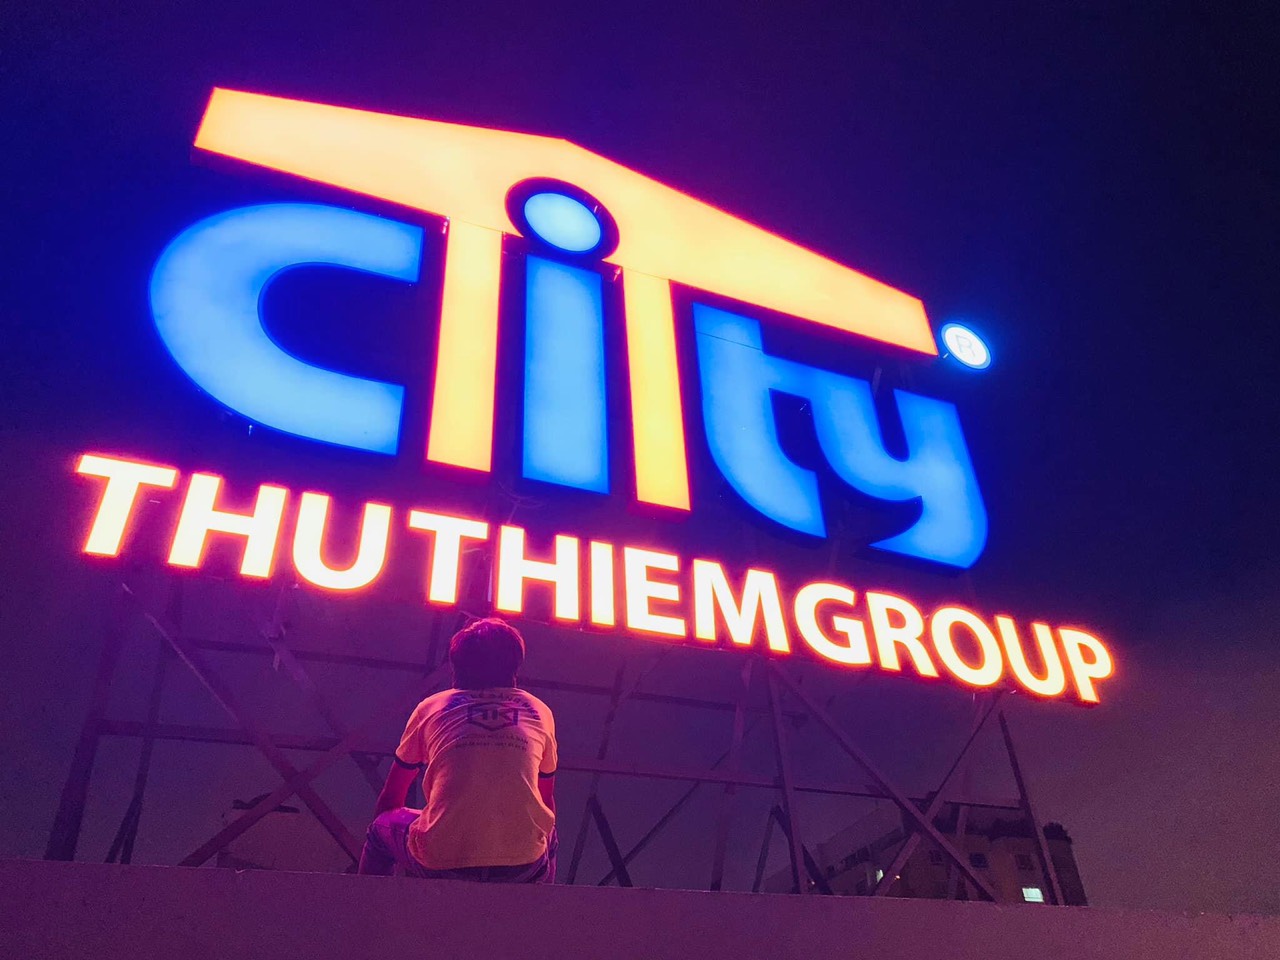 THUTHIEMGROUP